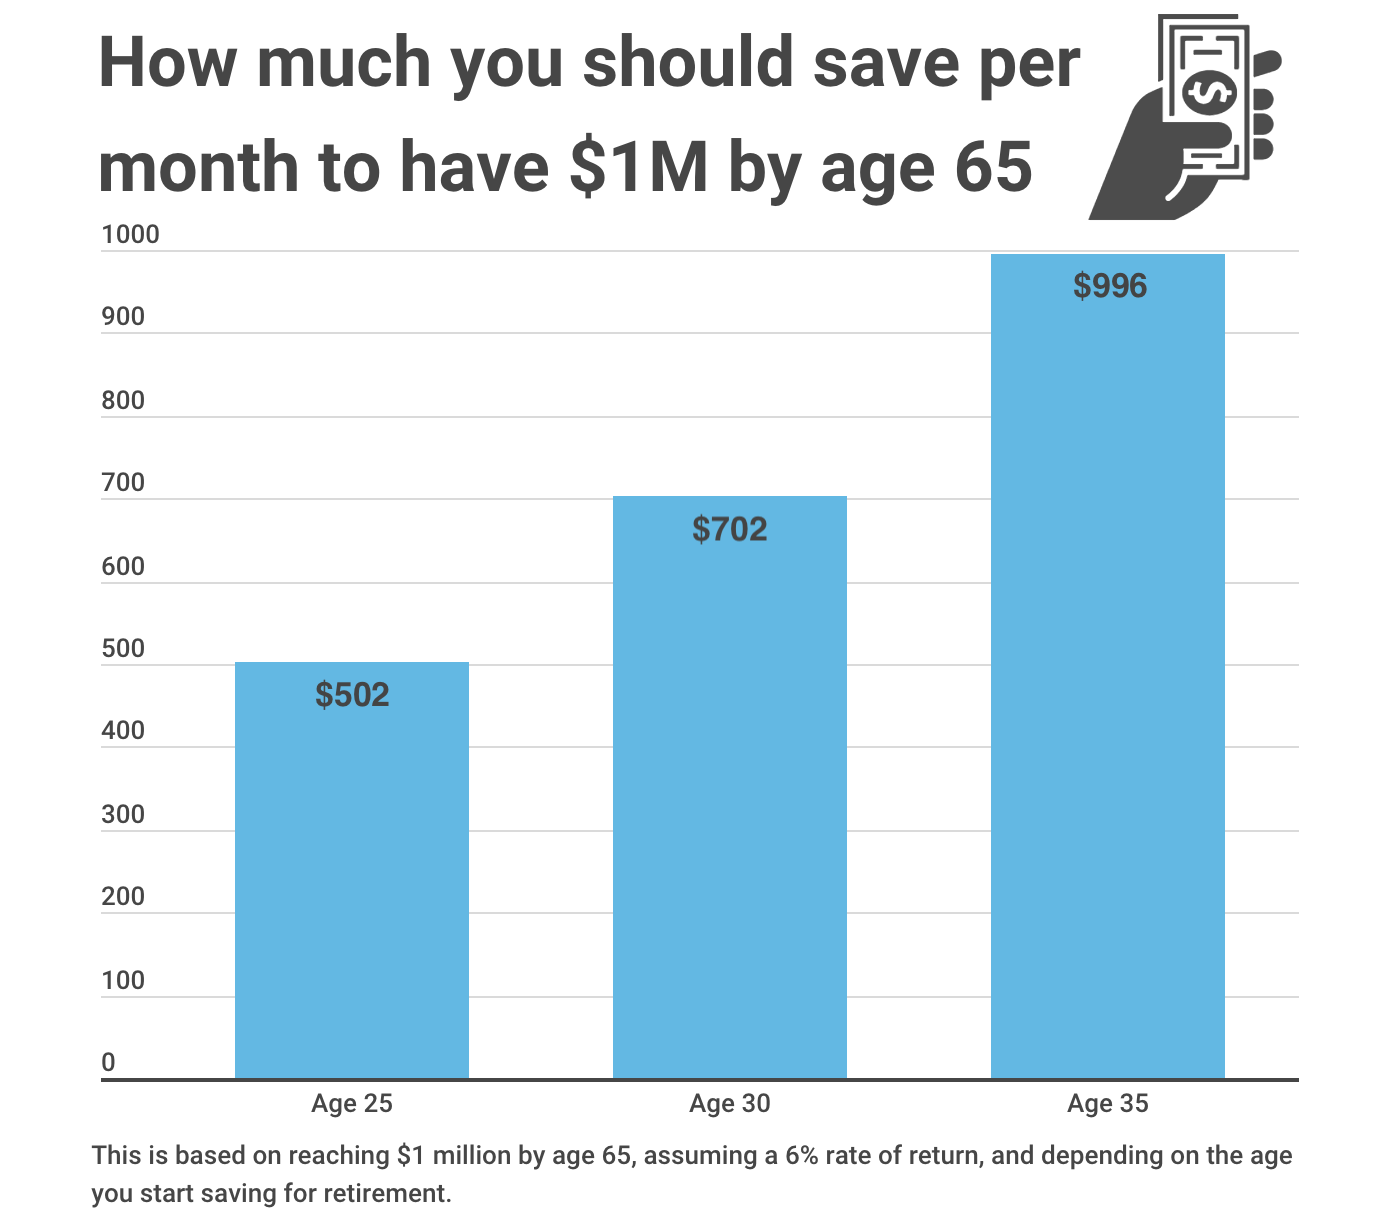 how much to save per month to have $1M by age 65